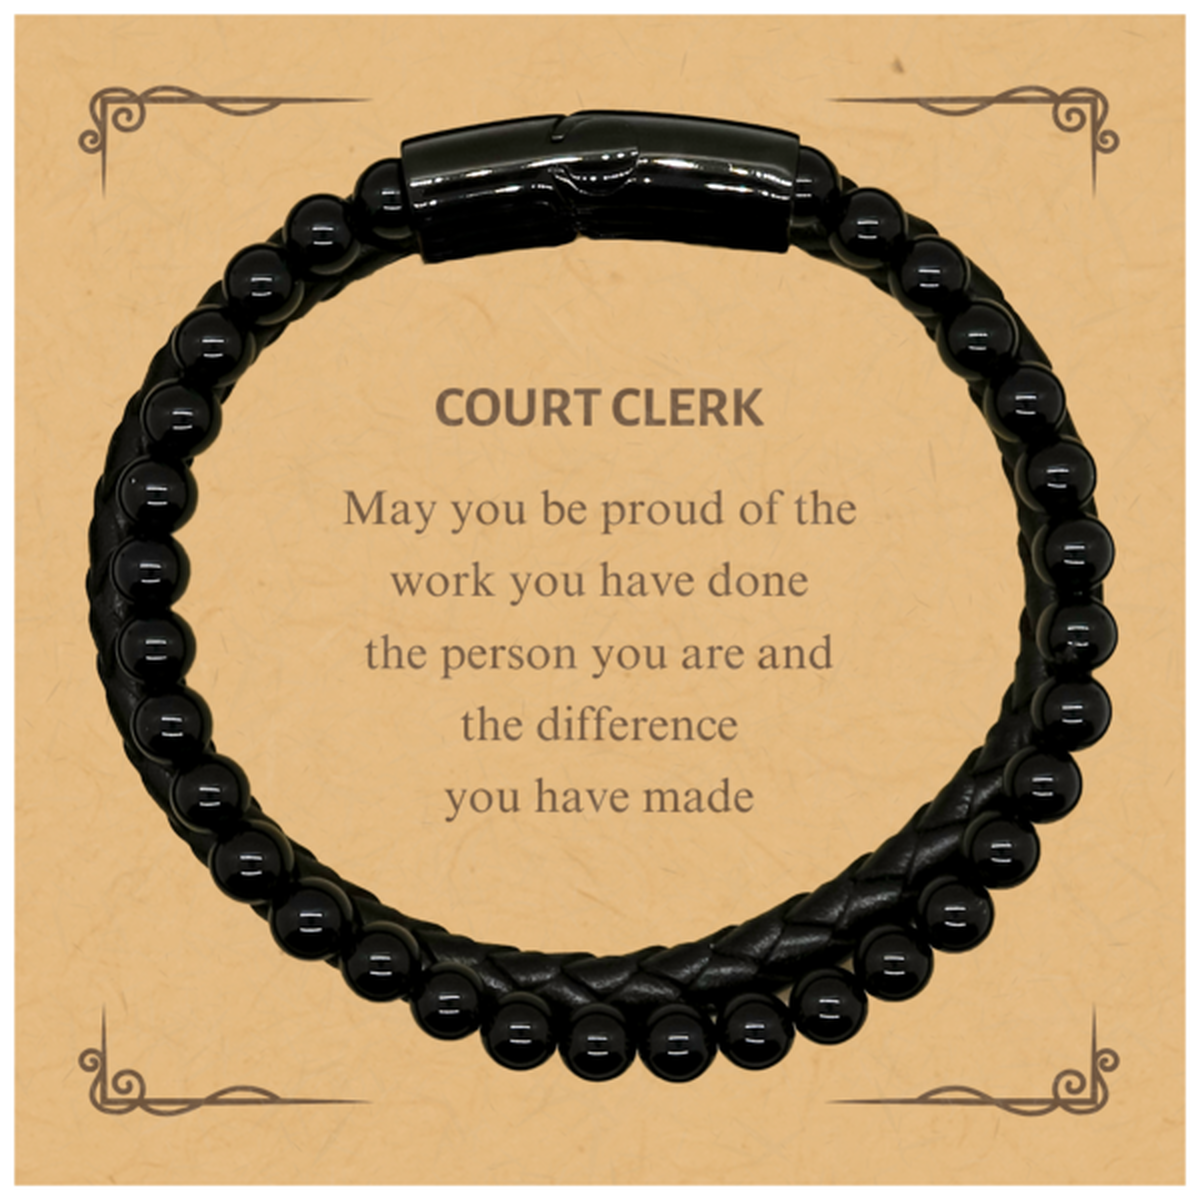 Court Clerk May you be proud of the work you have done, Retirement Court Clerk Stone Leather Bracelets for Colleague Appreciation Gifts Amazing for Court Clerk